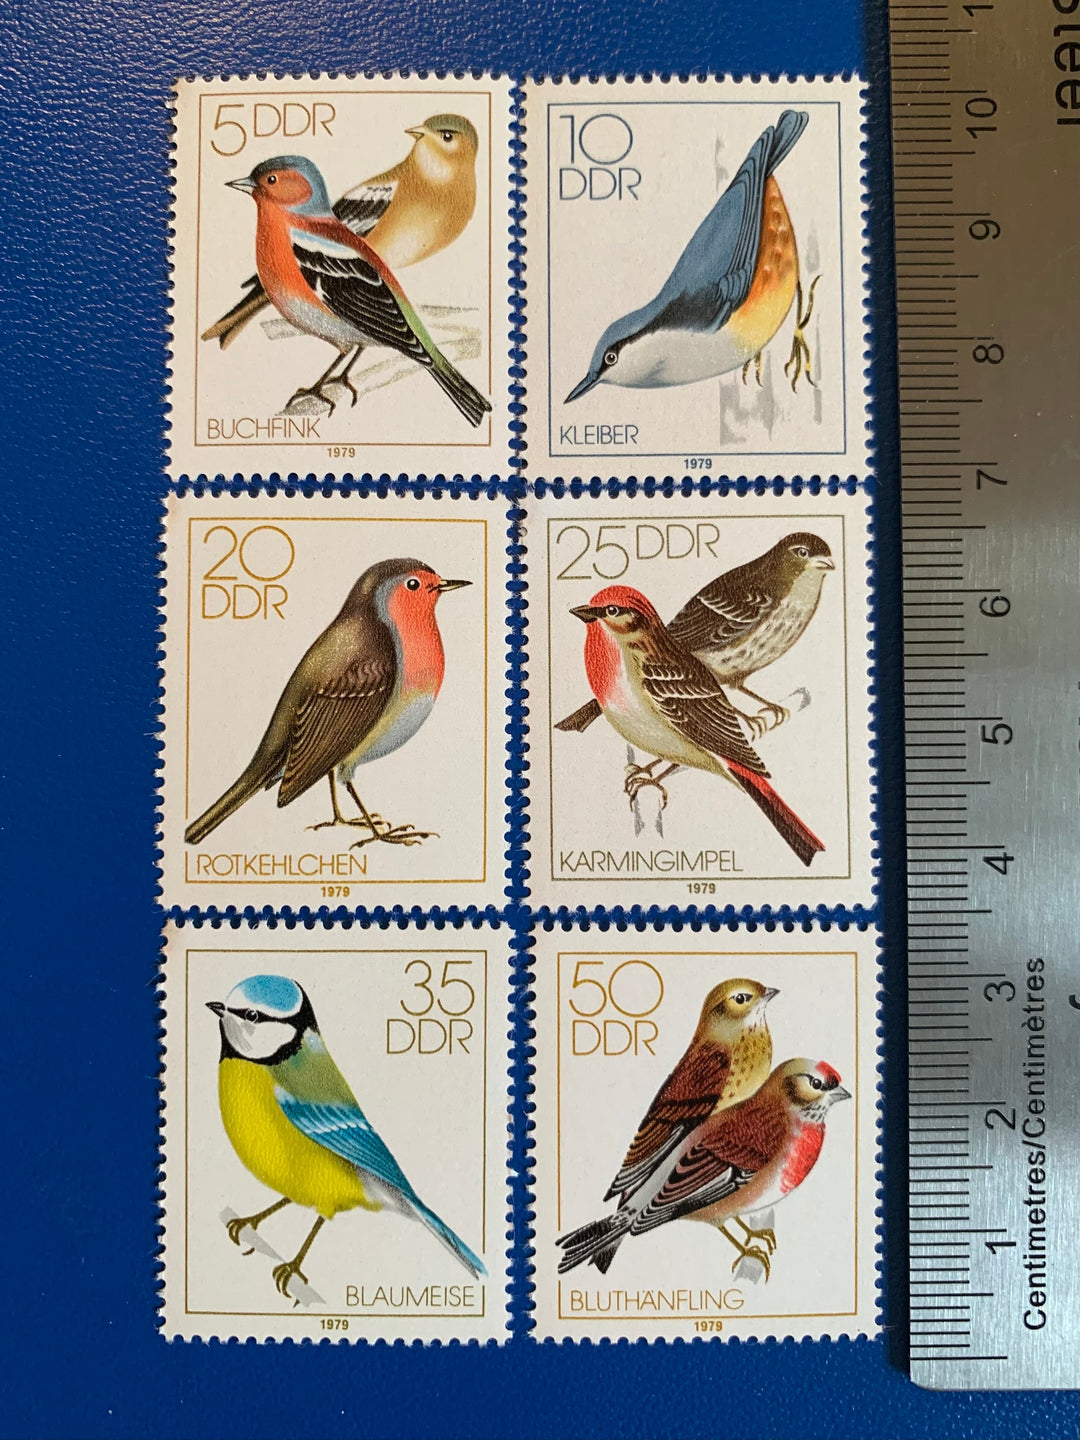 East Germany (DDR) -Original Vintage Postage Stamps - 1979 - Native Songbirds - for the collector, artist or crafter